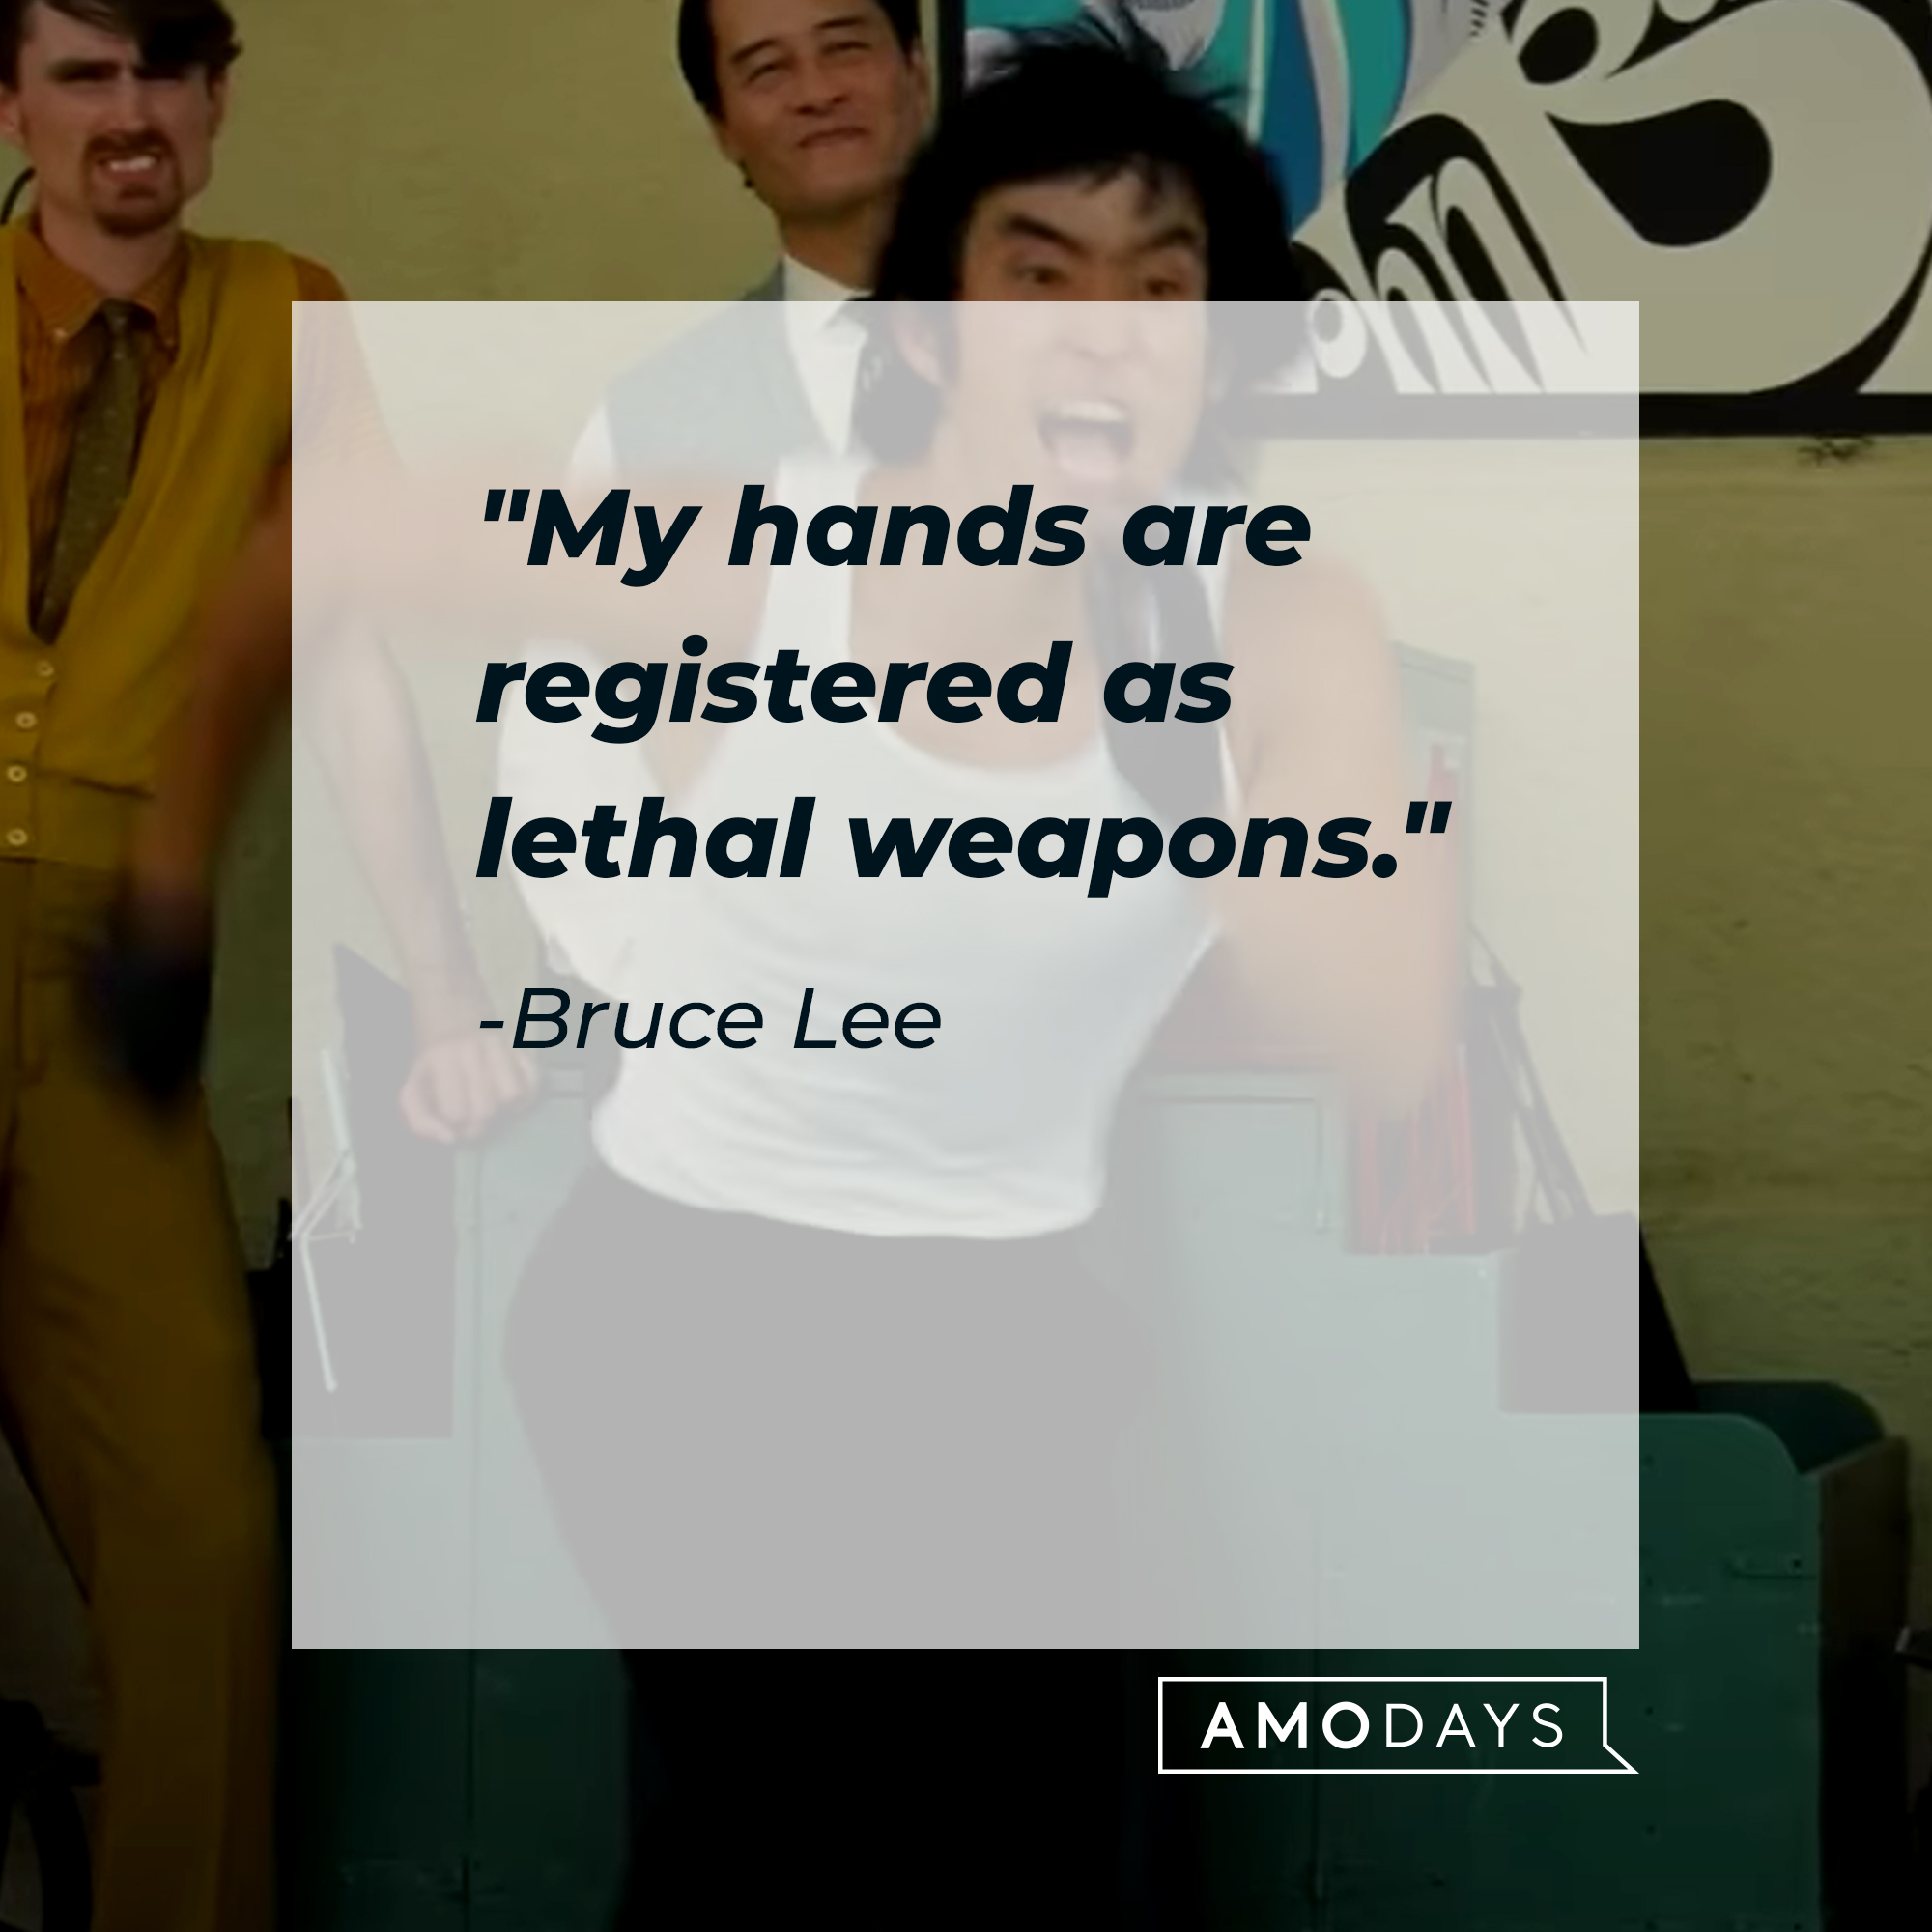 Bruce Lee with the quote, "My hands are registered as lethal weapons." | Source: Facebook/OnceInHollywood